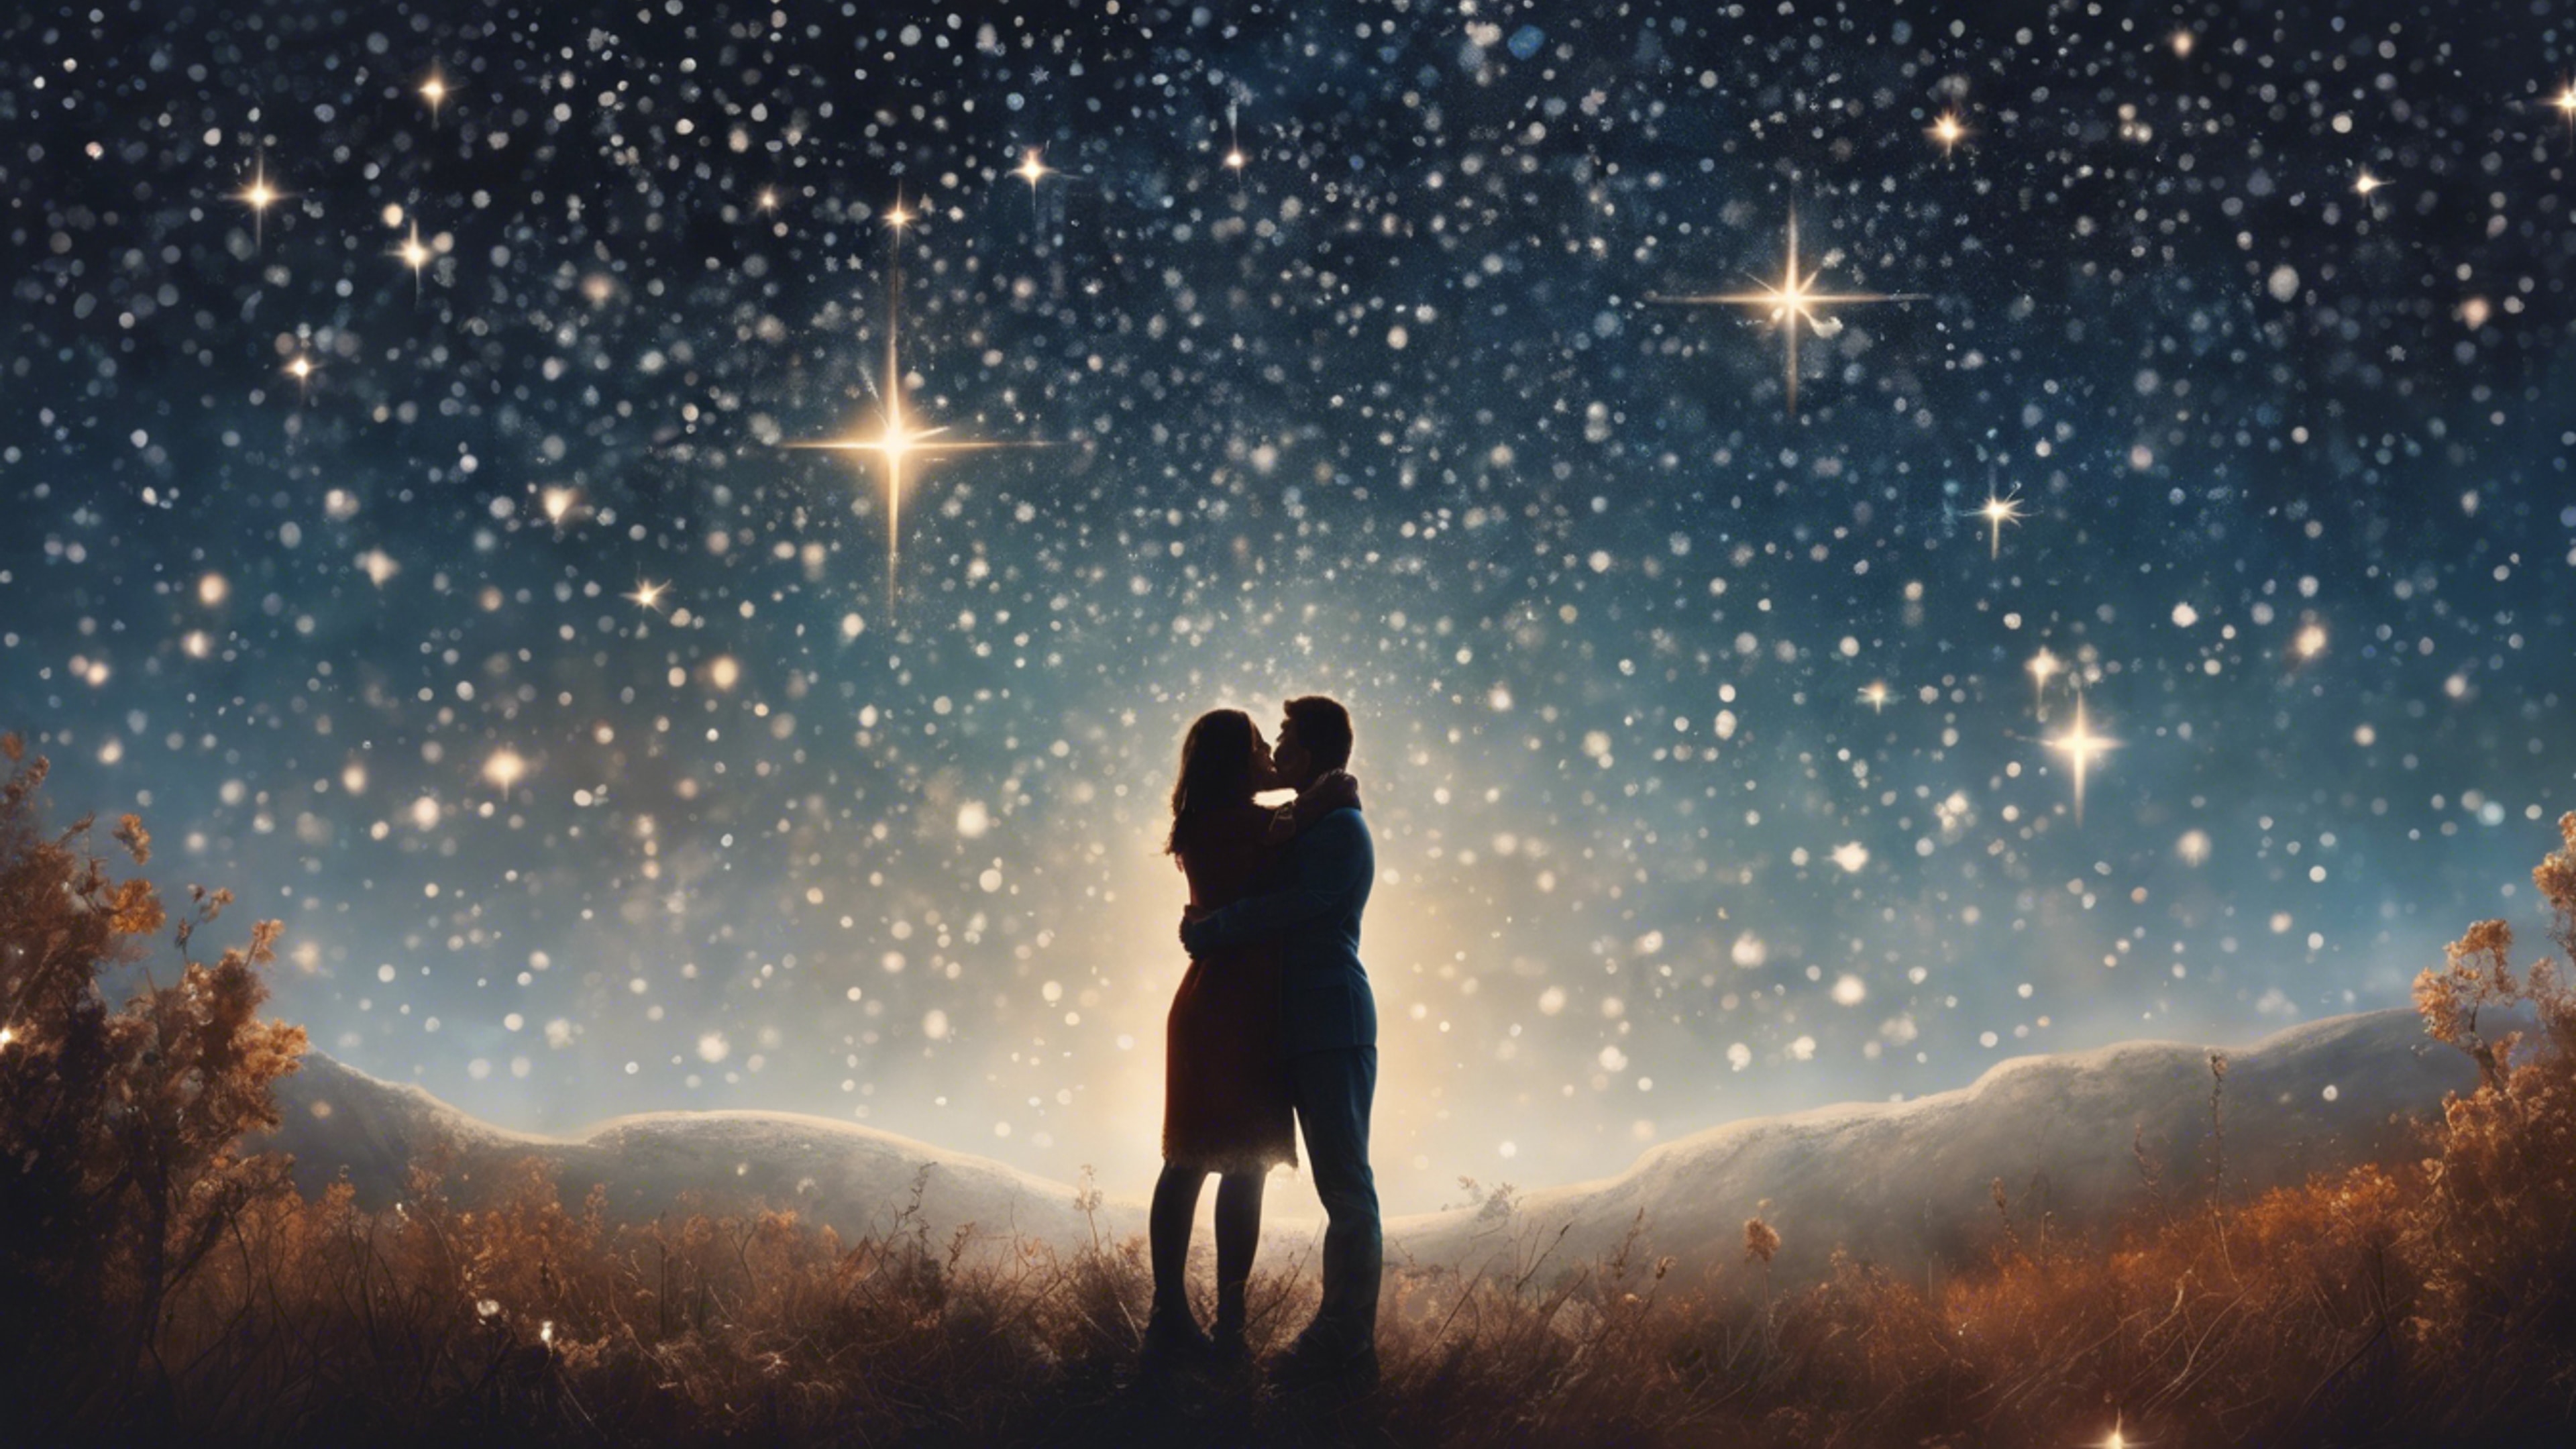 A timeless painting of a couple sharing a romantic moment under a star-filled sky. Tapeta[26fb6f637c3e4c759c8d]